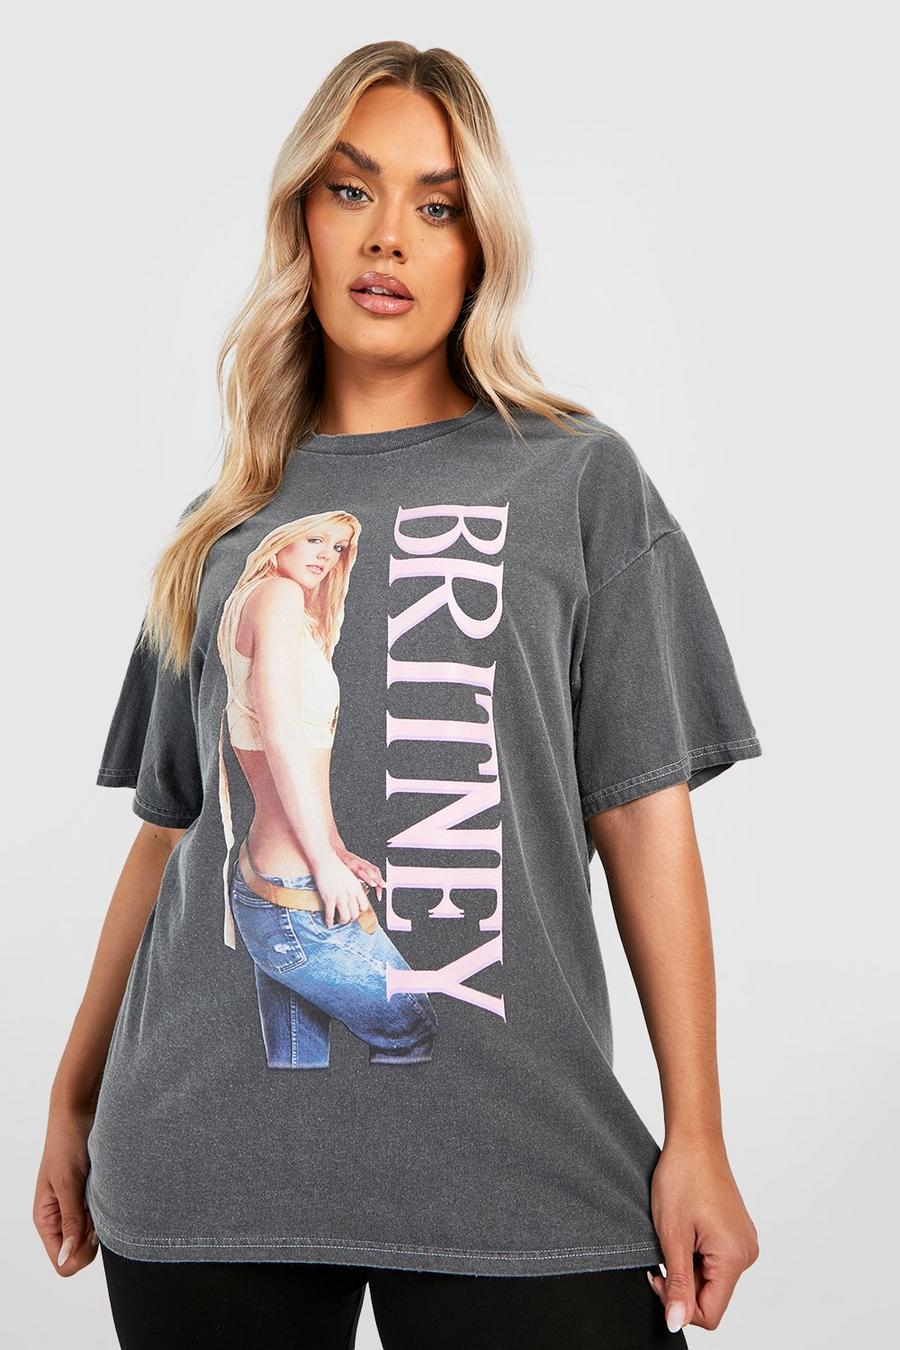 Charcoal gris Plus Britney Spears Licensed T-shirt